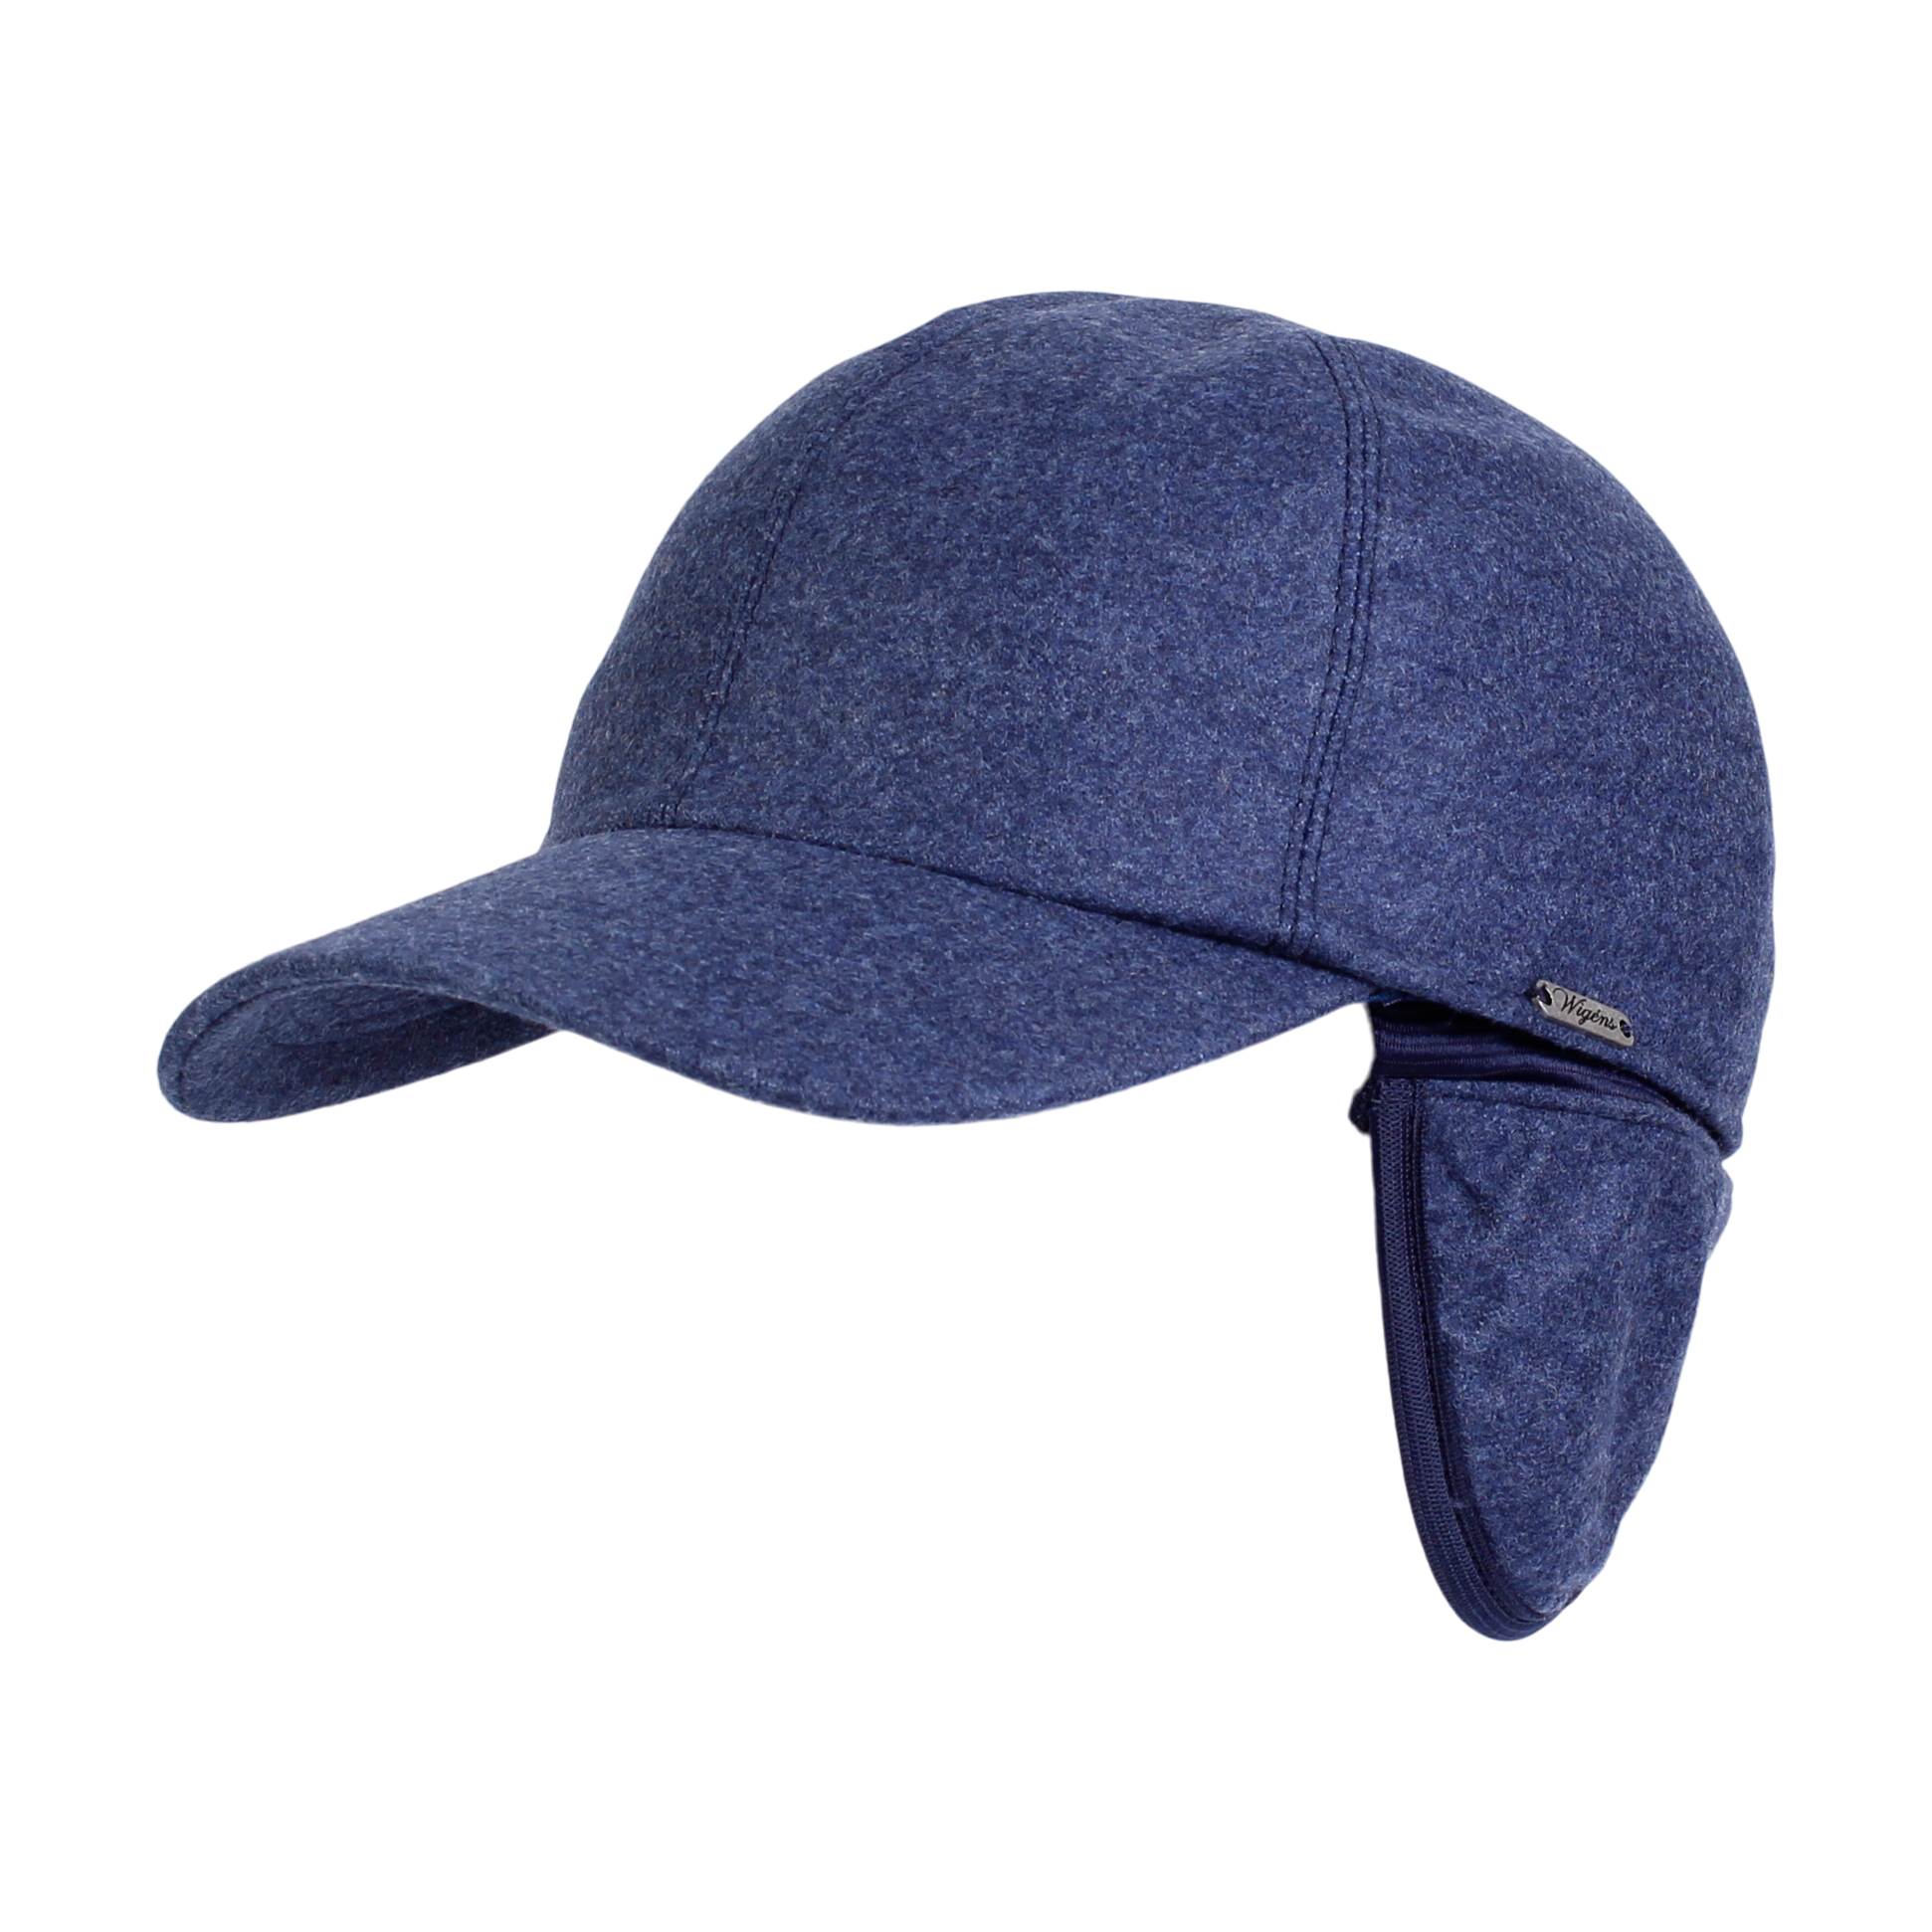 Loro Piana Storm System Wool Flannel Baseball Classic Cap with Earflaps (Choice of Colors) by Wigens